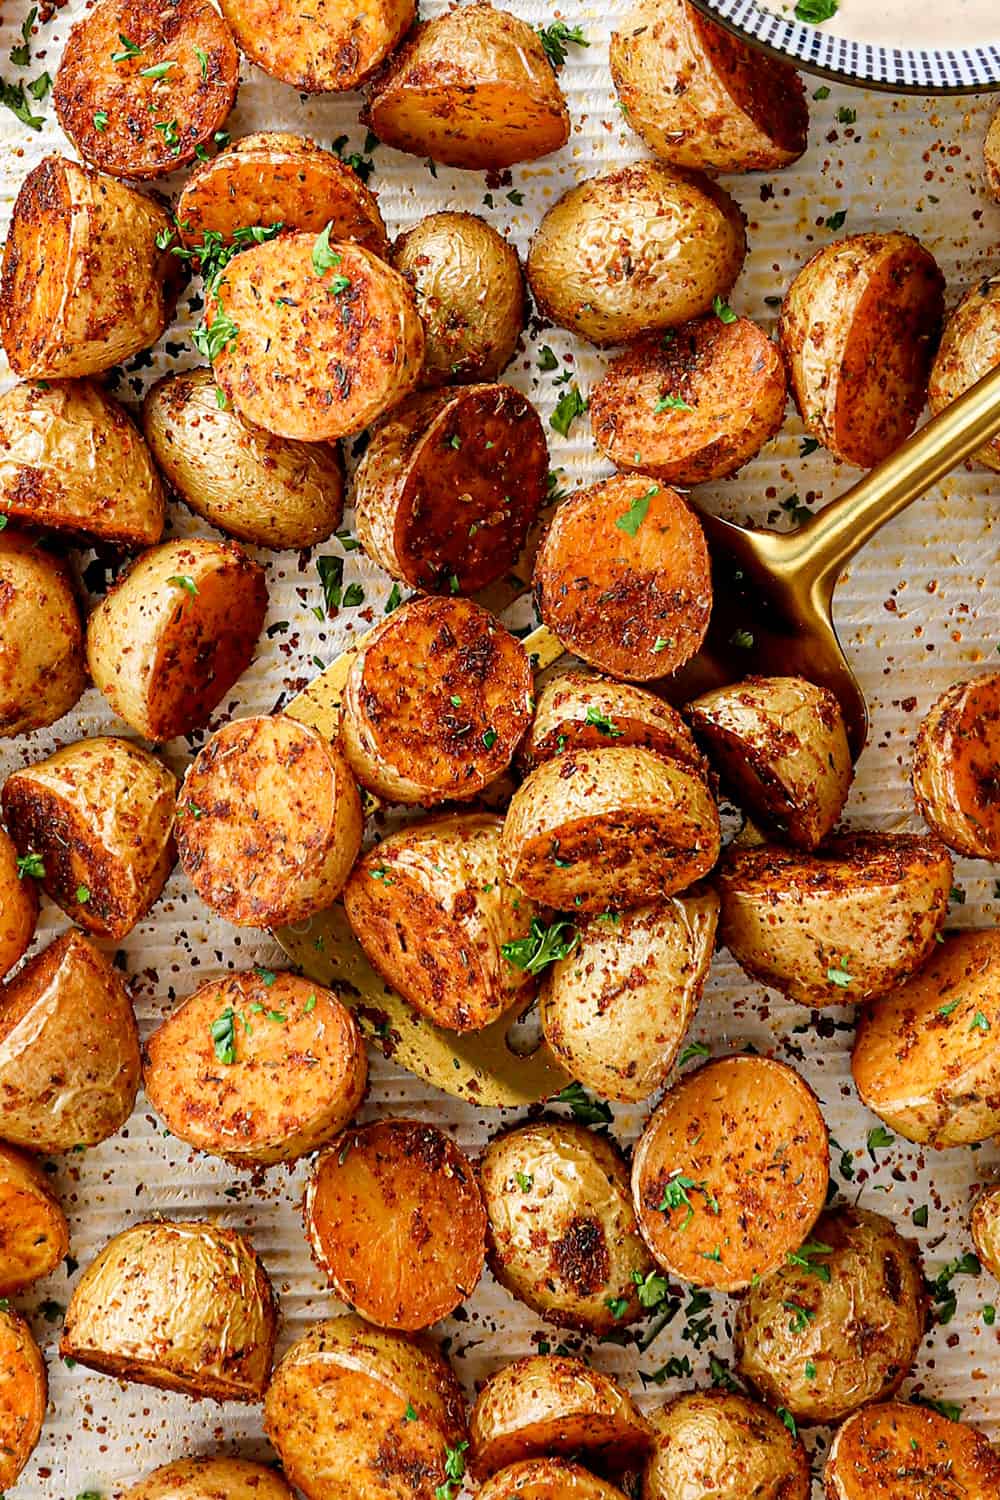 showing how to make roasted Cajun potatoes by baking in the oven until tender and crispy